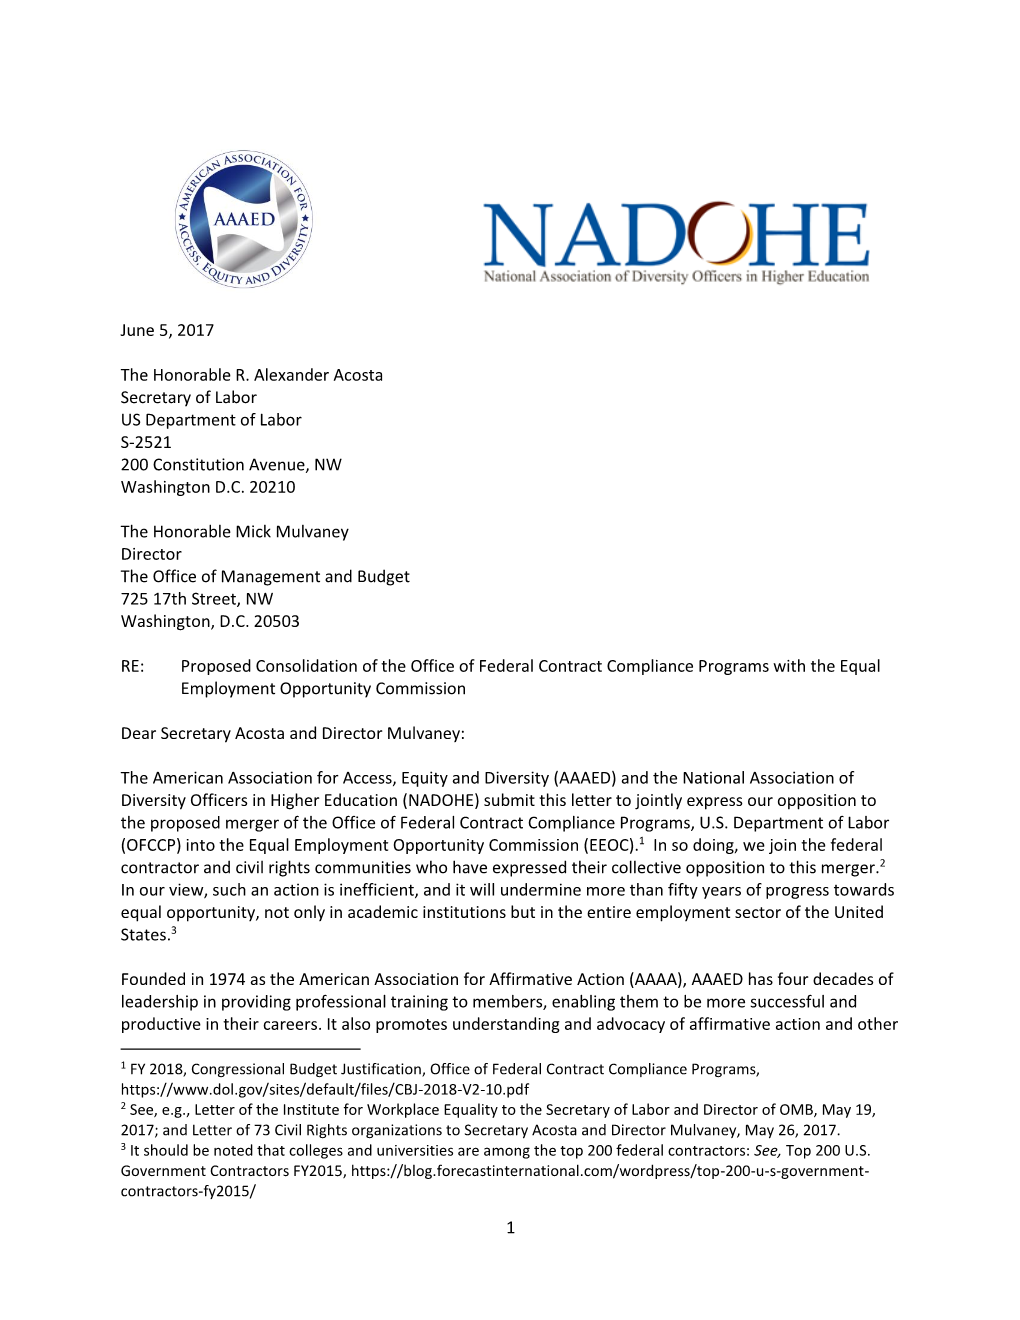 AAAED NADOHE Statement on OFCCP EEOC Merger